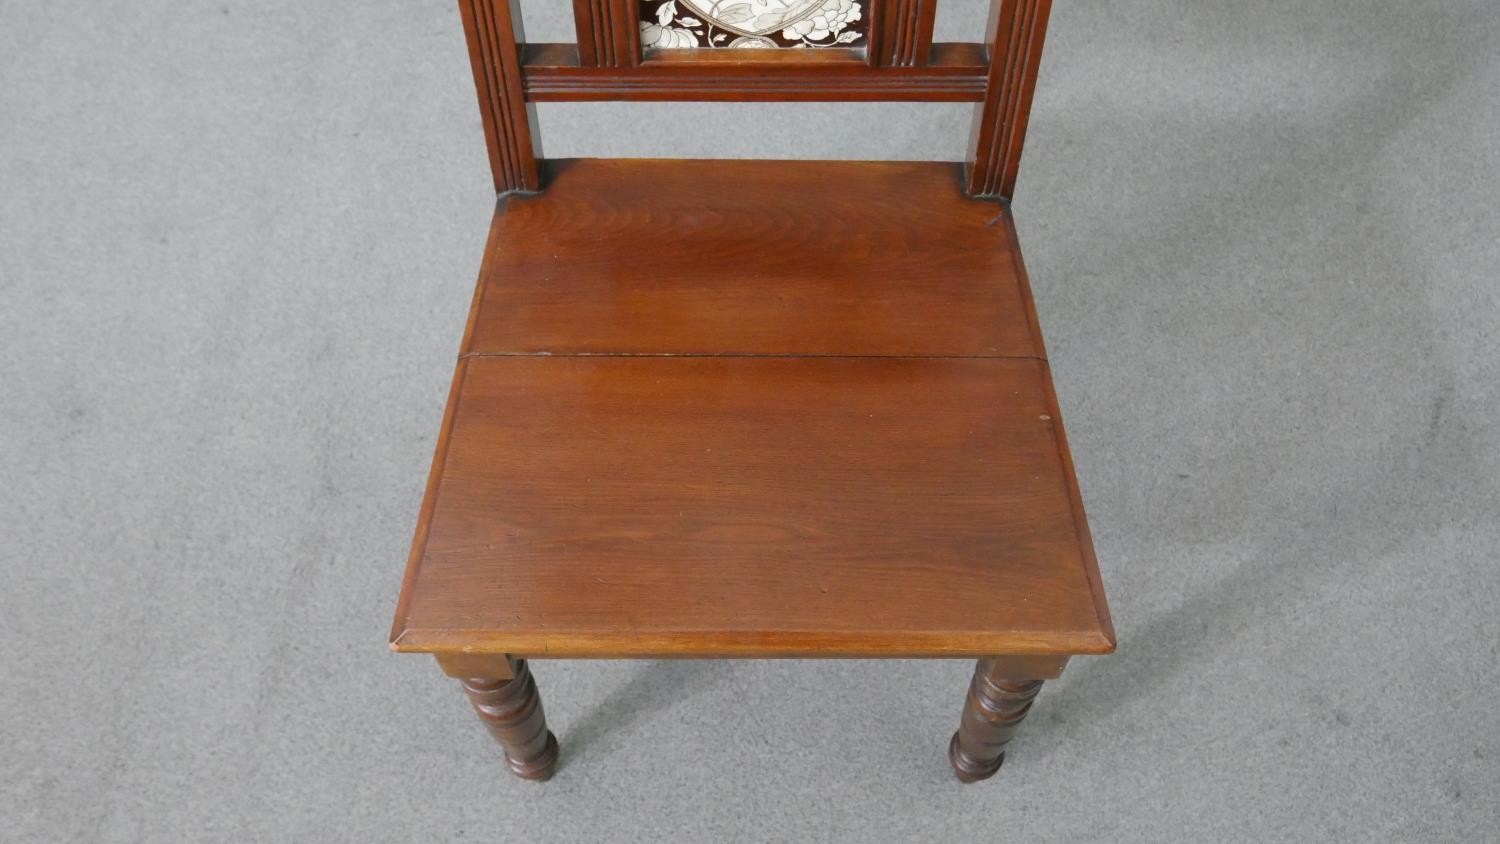 A pair of Victorian walnut Aesthetic movement hall chairs, the back set with a single tile, possibly - Image 7 of 8